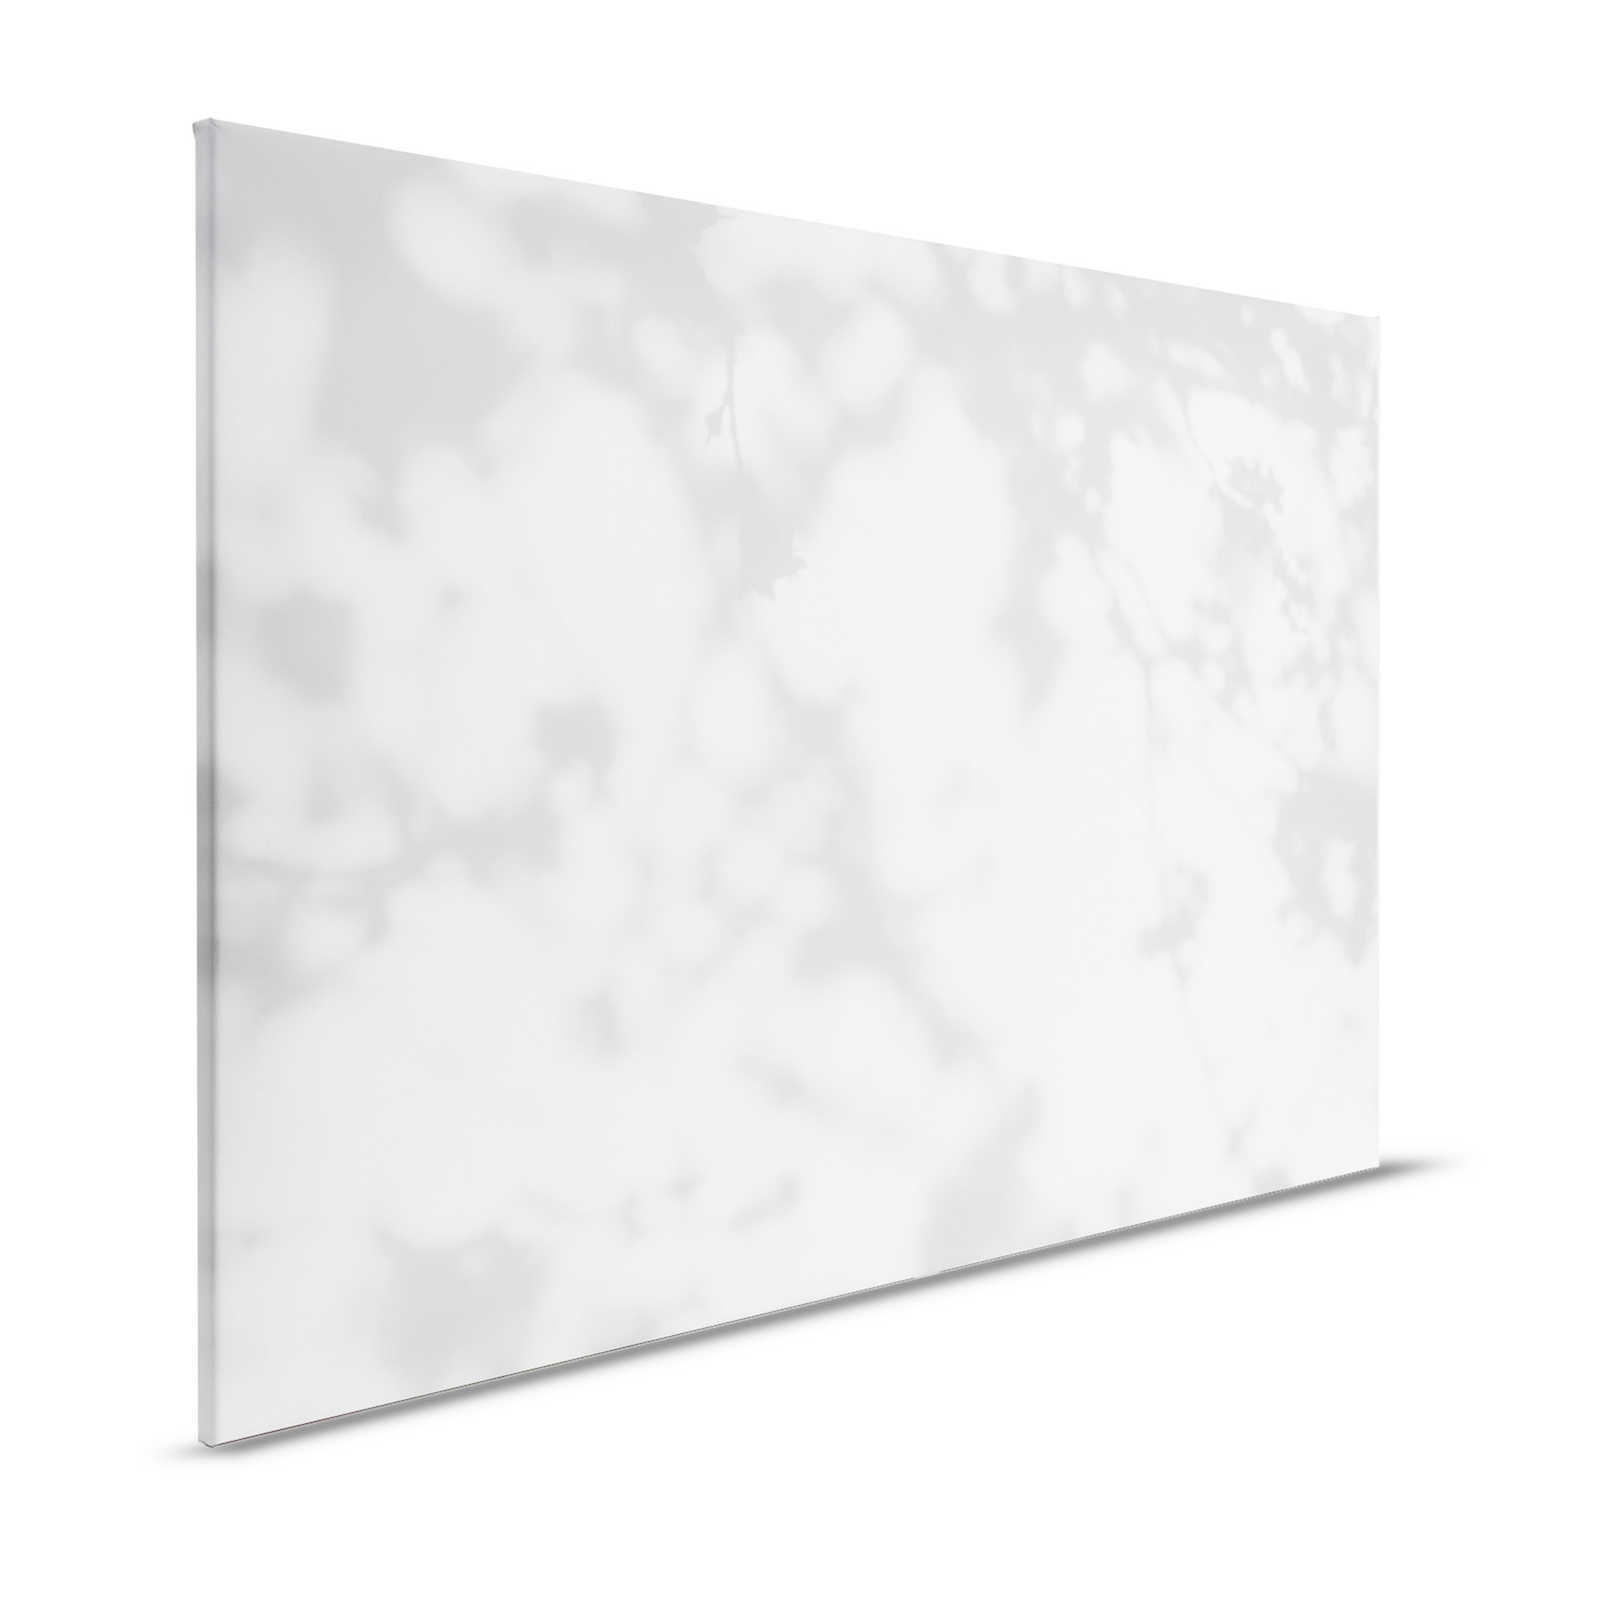 Light Room 1 - Canvas painting Nature Shadows in Grey & White - 1.20 m x 0.80 m
